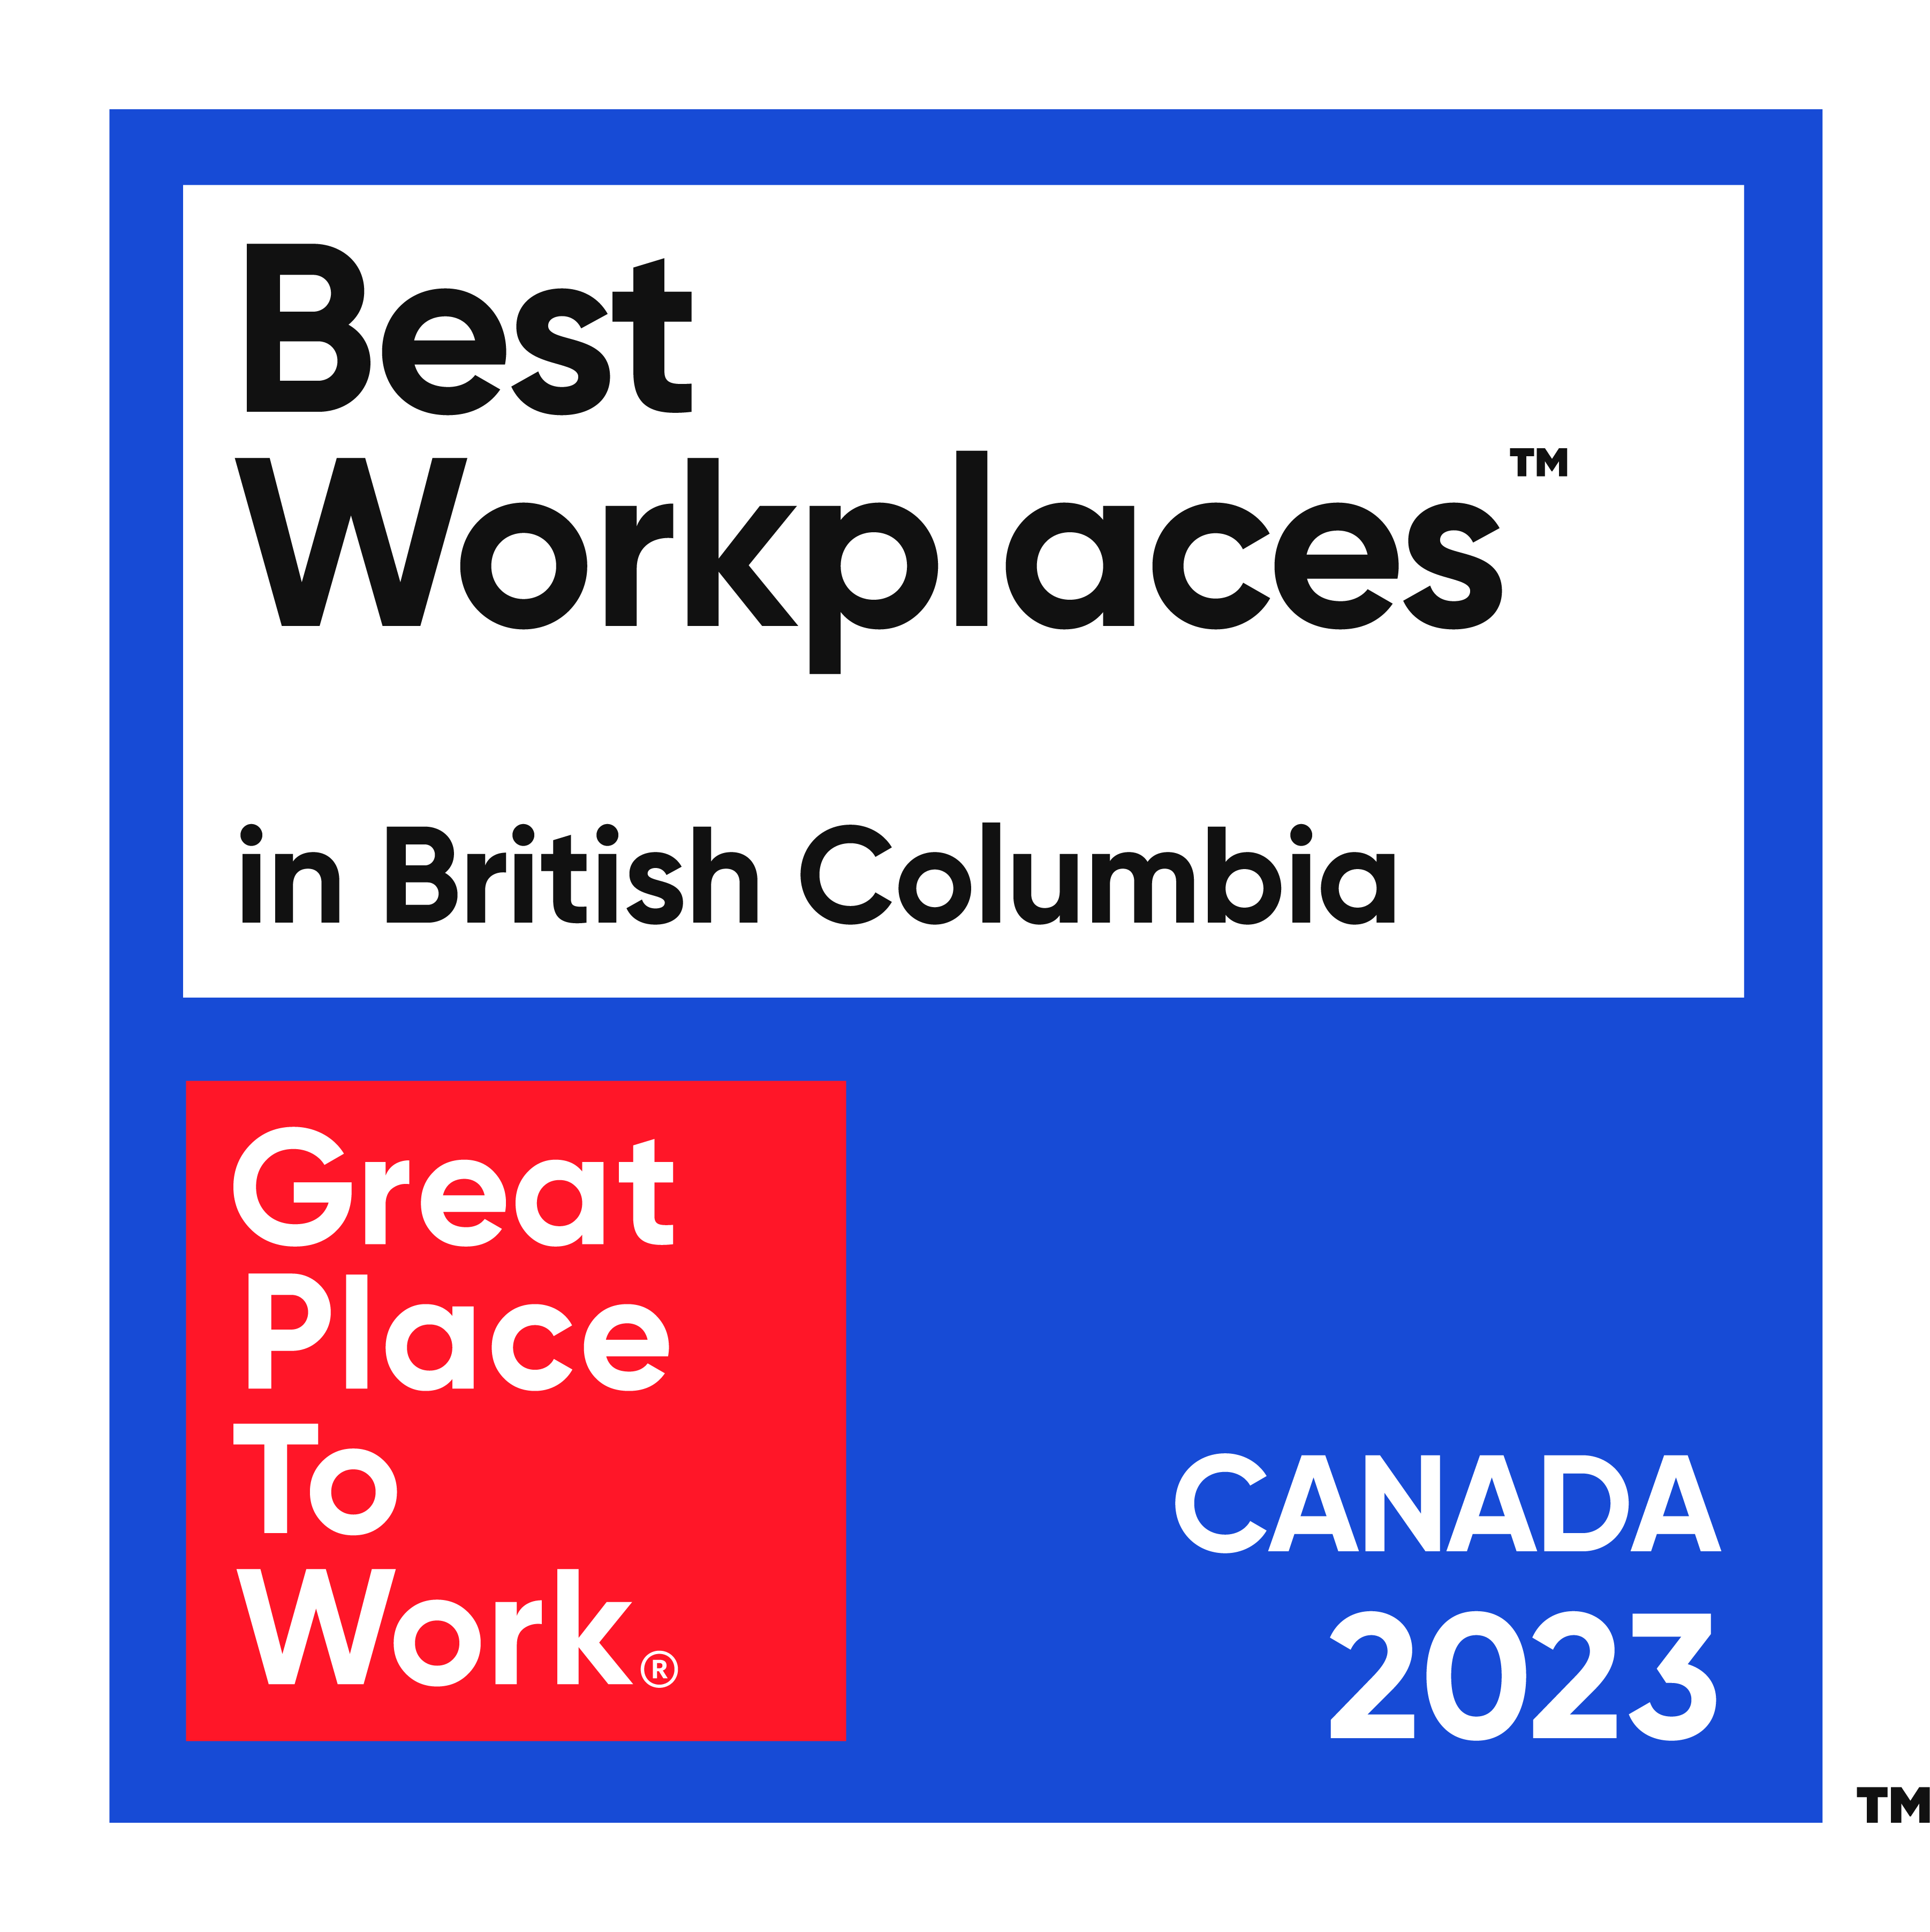 Best Workplaces  in British Columbia, Great Places to Work, Canada 2023